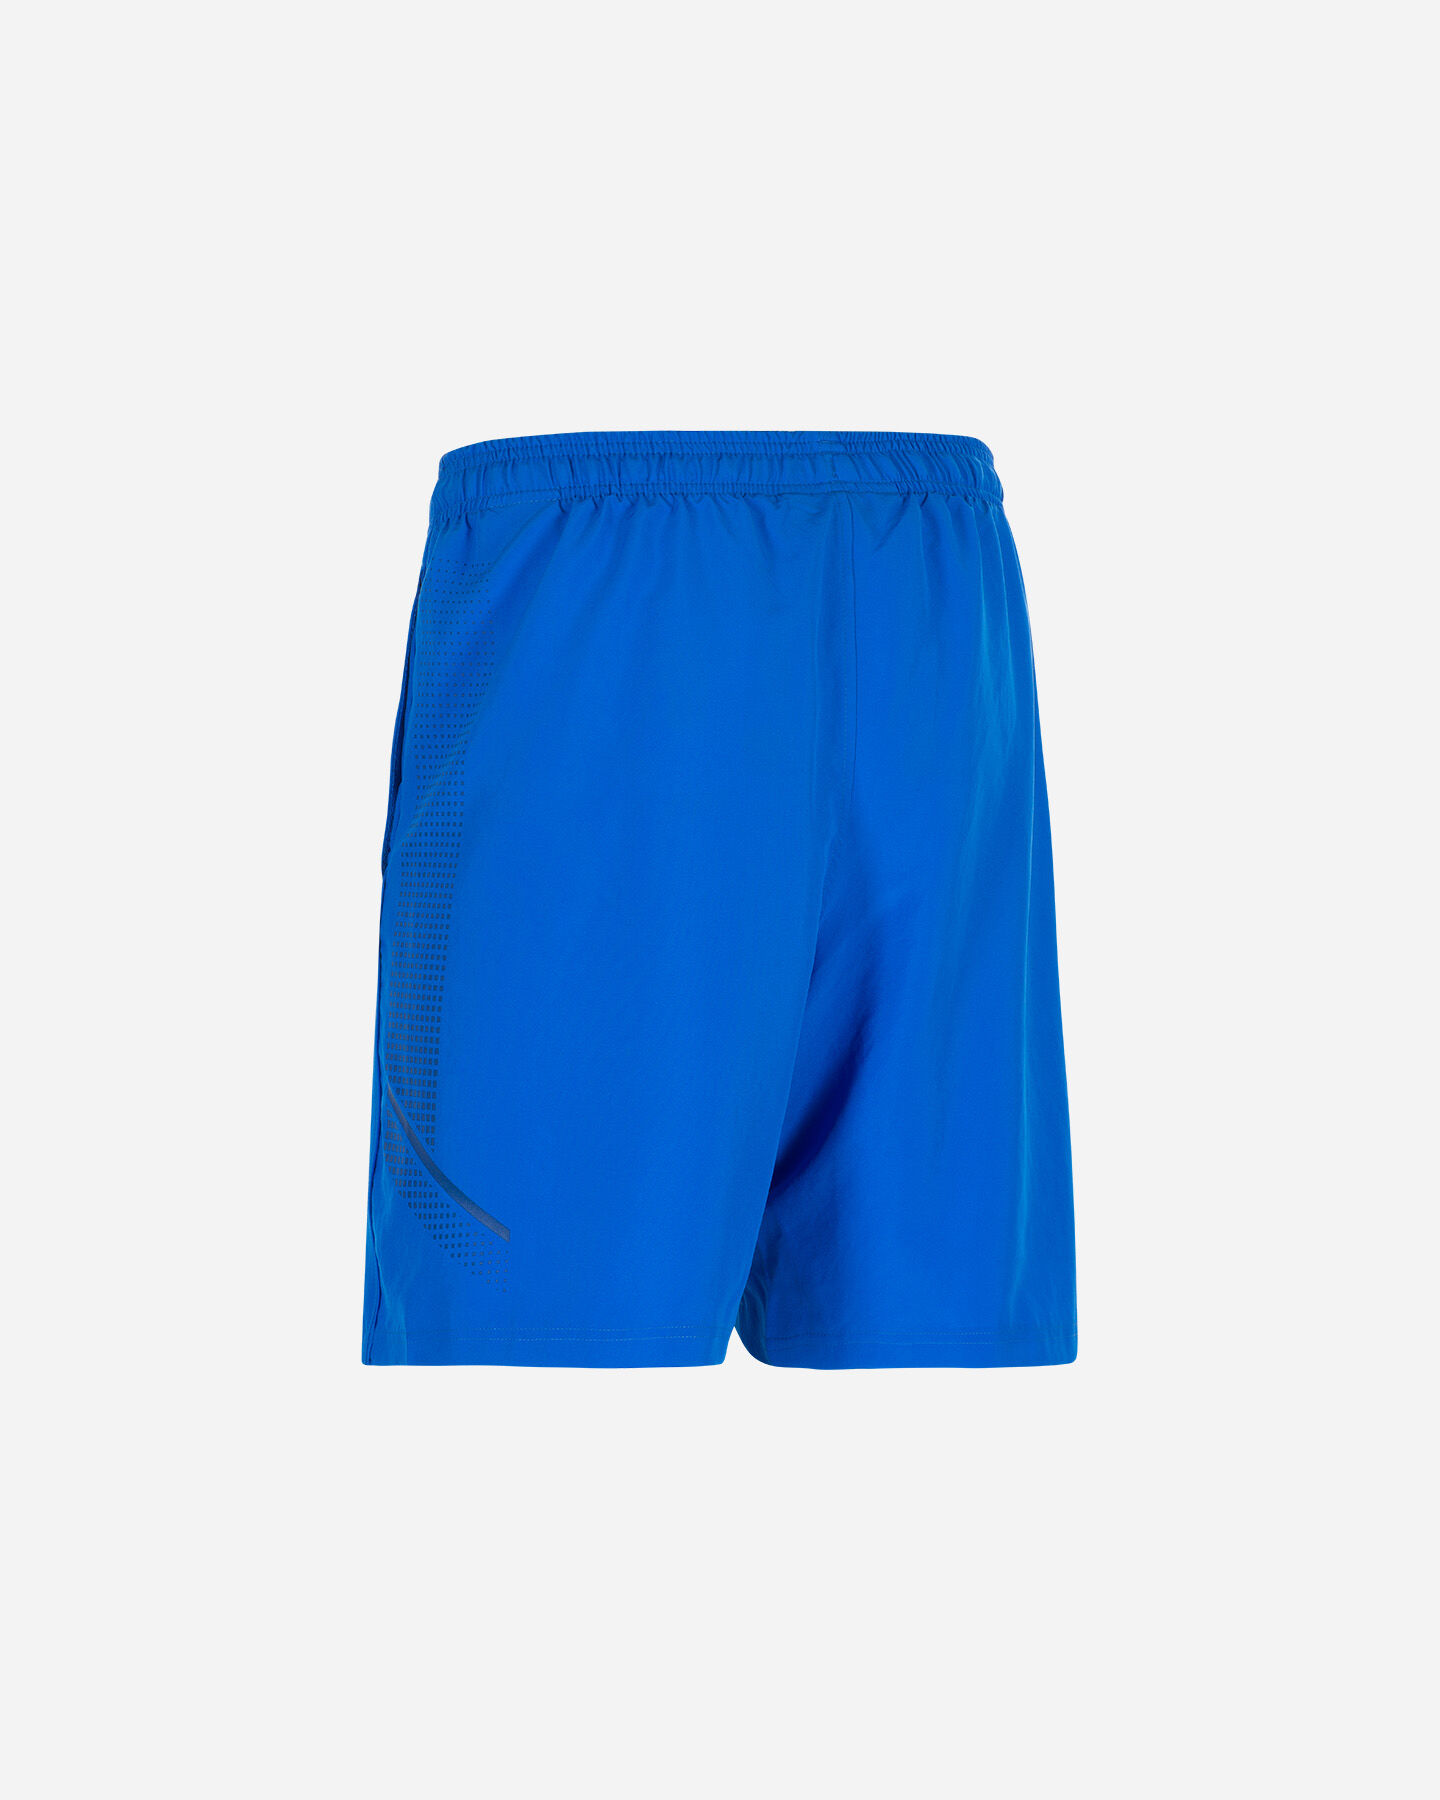  Pantalone training UNDER ARMOUR GRAPHIC M S5168087|0486|SM scatto 1